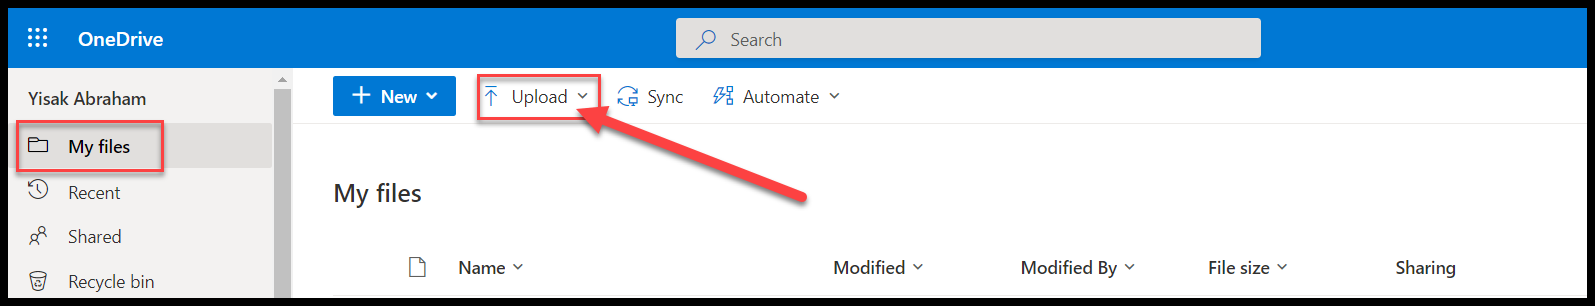 Upload and save files and folders to OneDrive - Microsoft Support